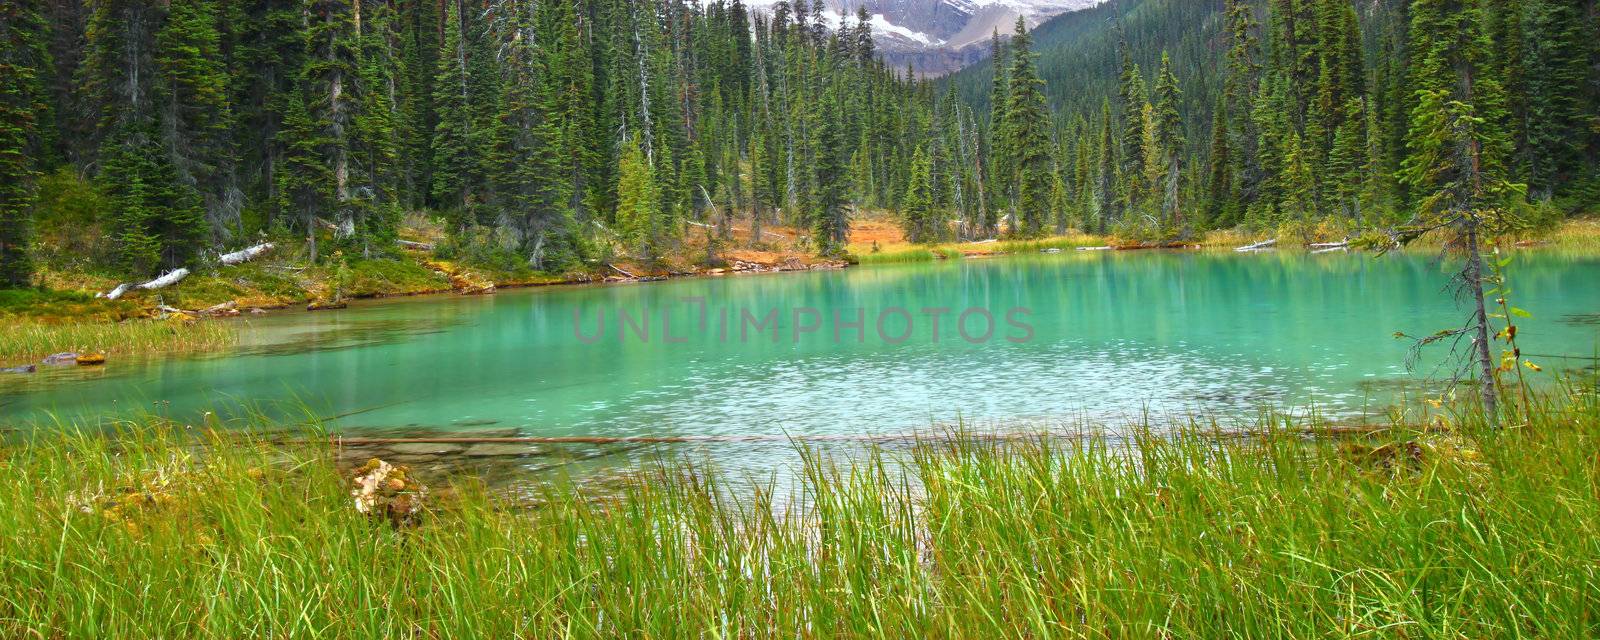 Lovely turquoise colored pond in Yoho National Park of British Columbia.